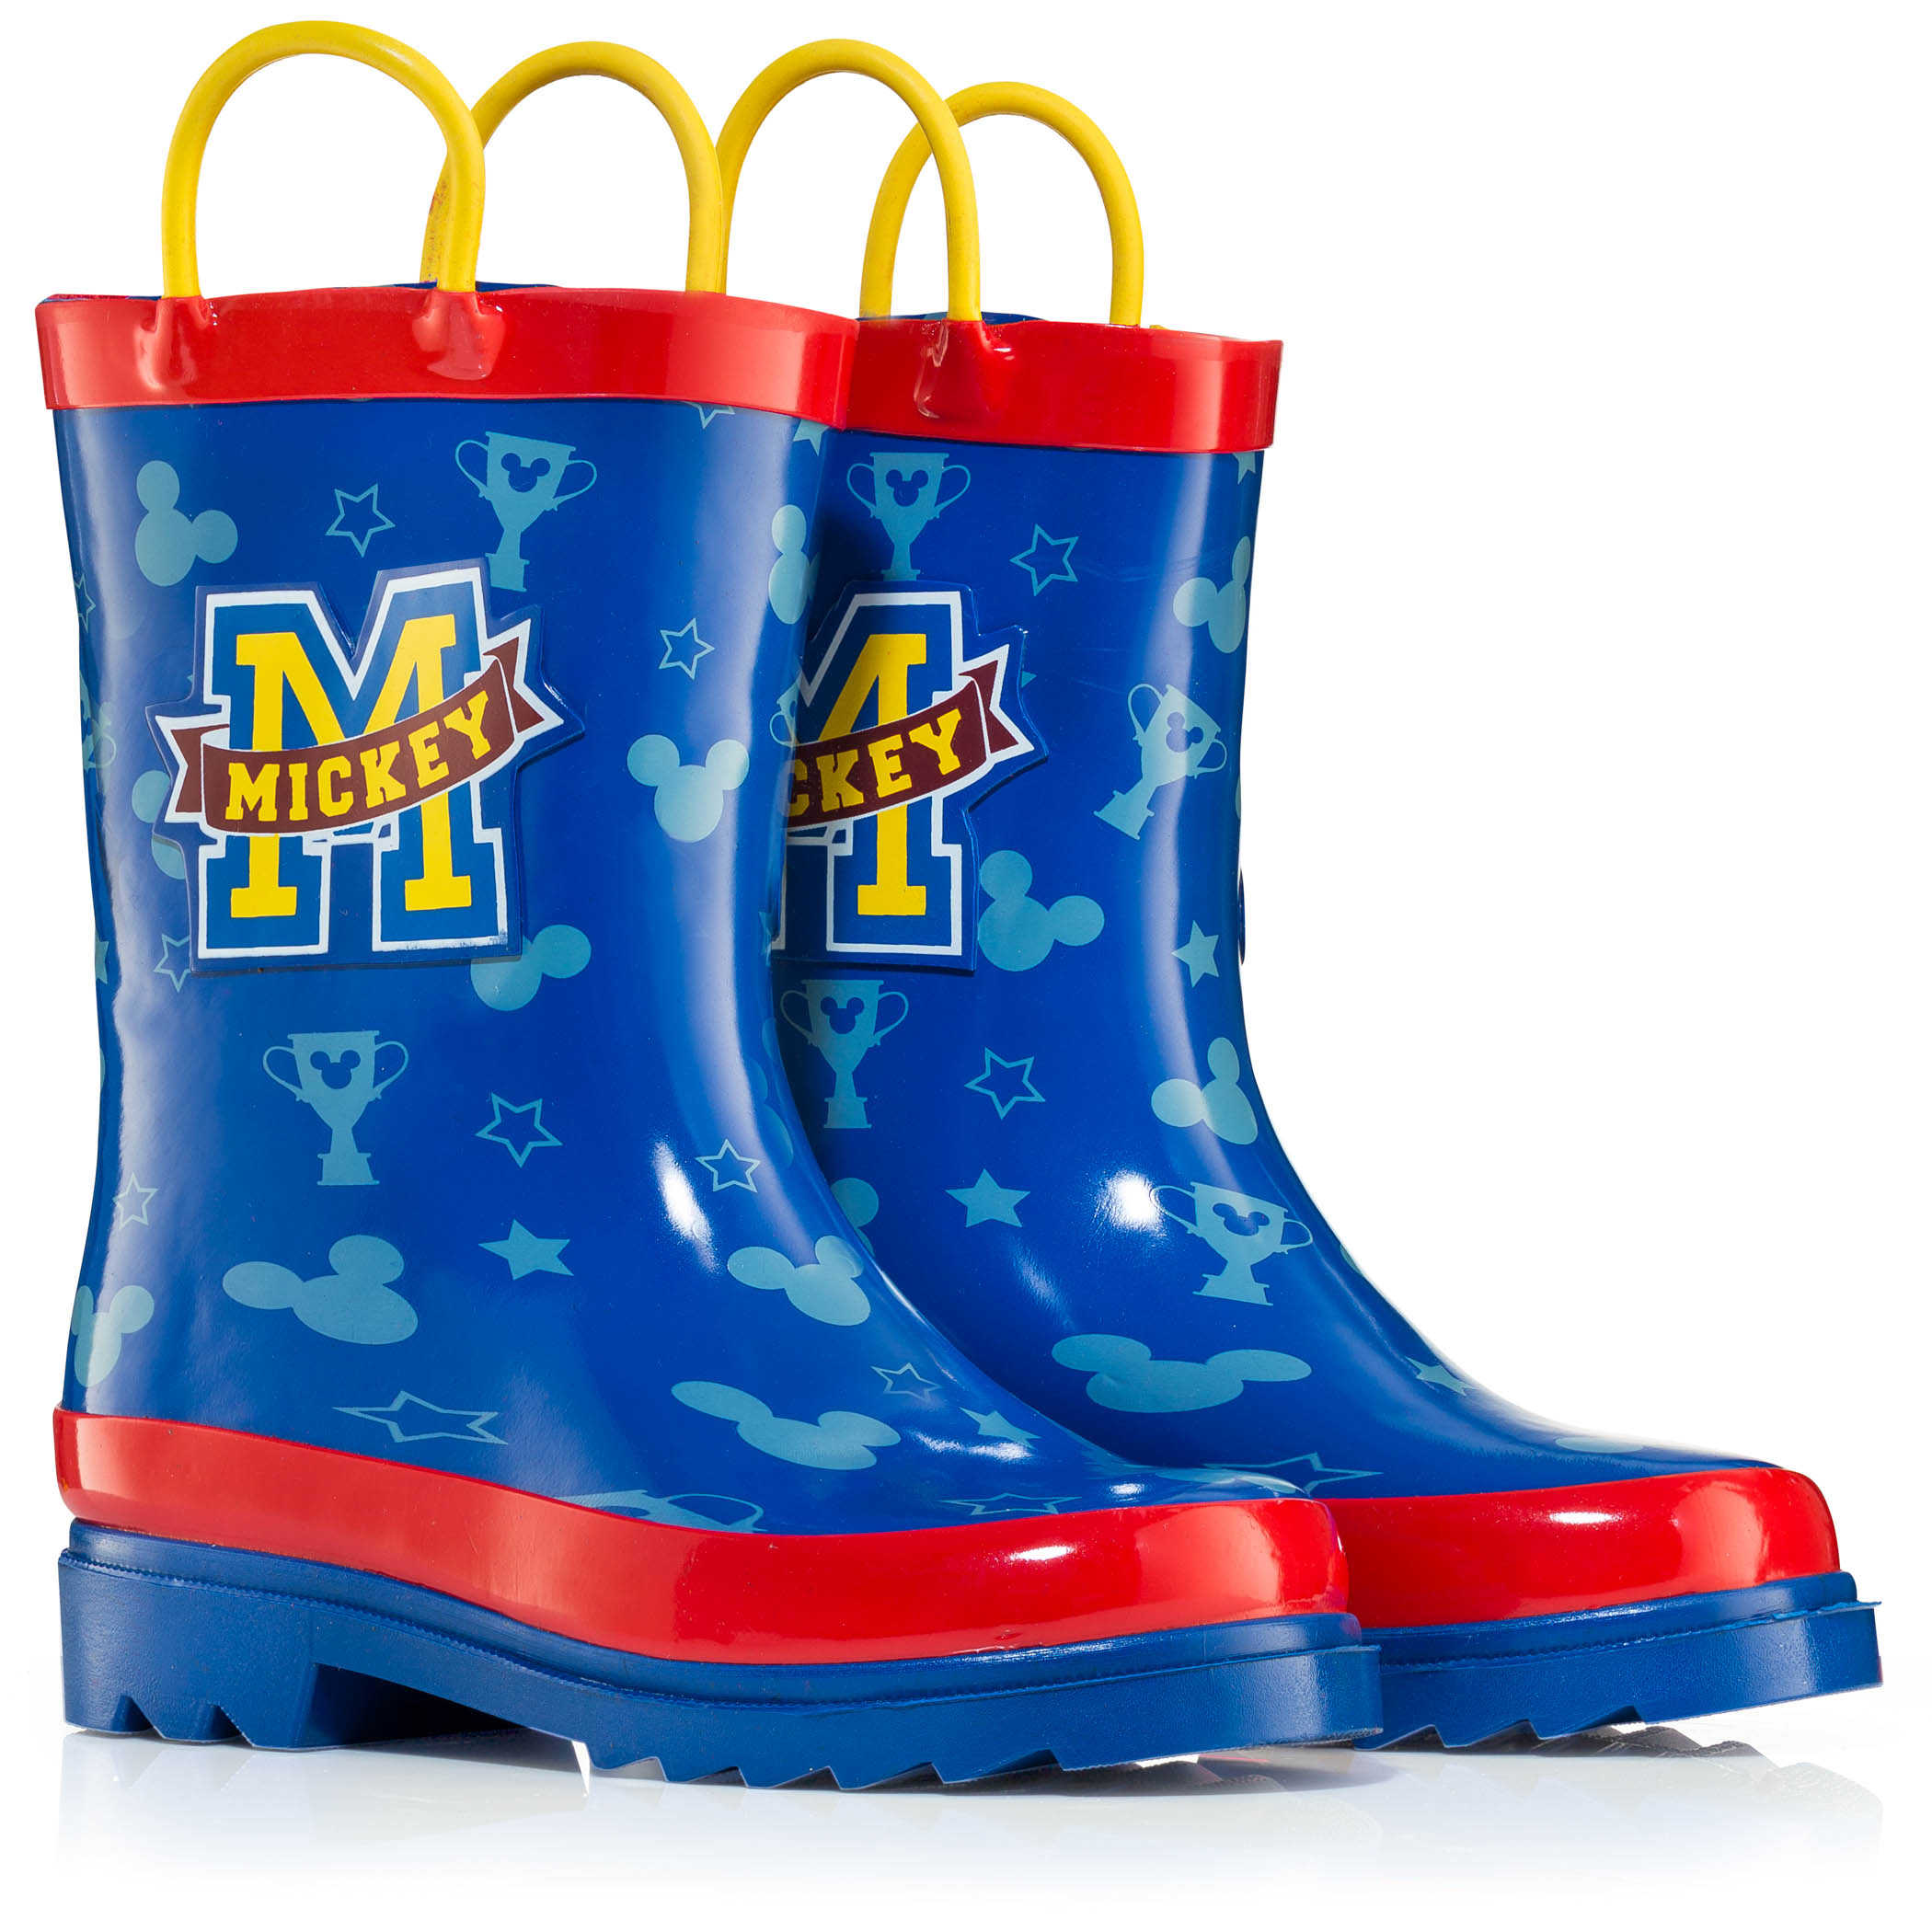 Disney Mickey Mouse Blue Rubber Rain Boots - Size 11 toddler - image 4 of 6